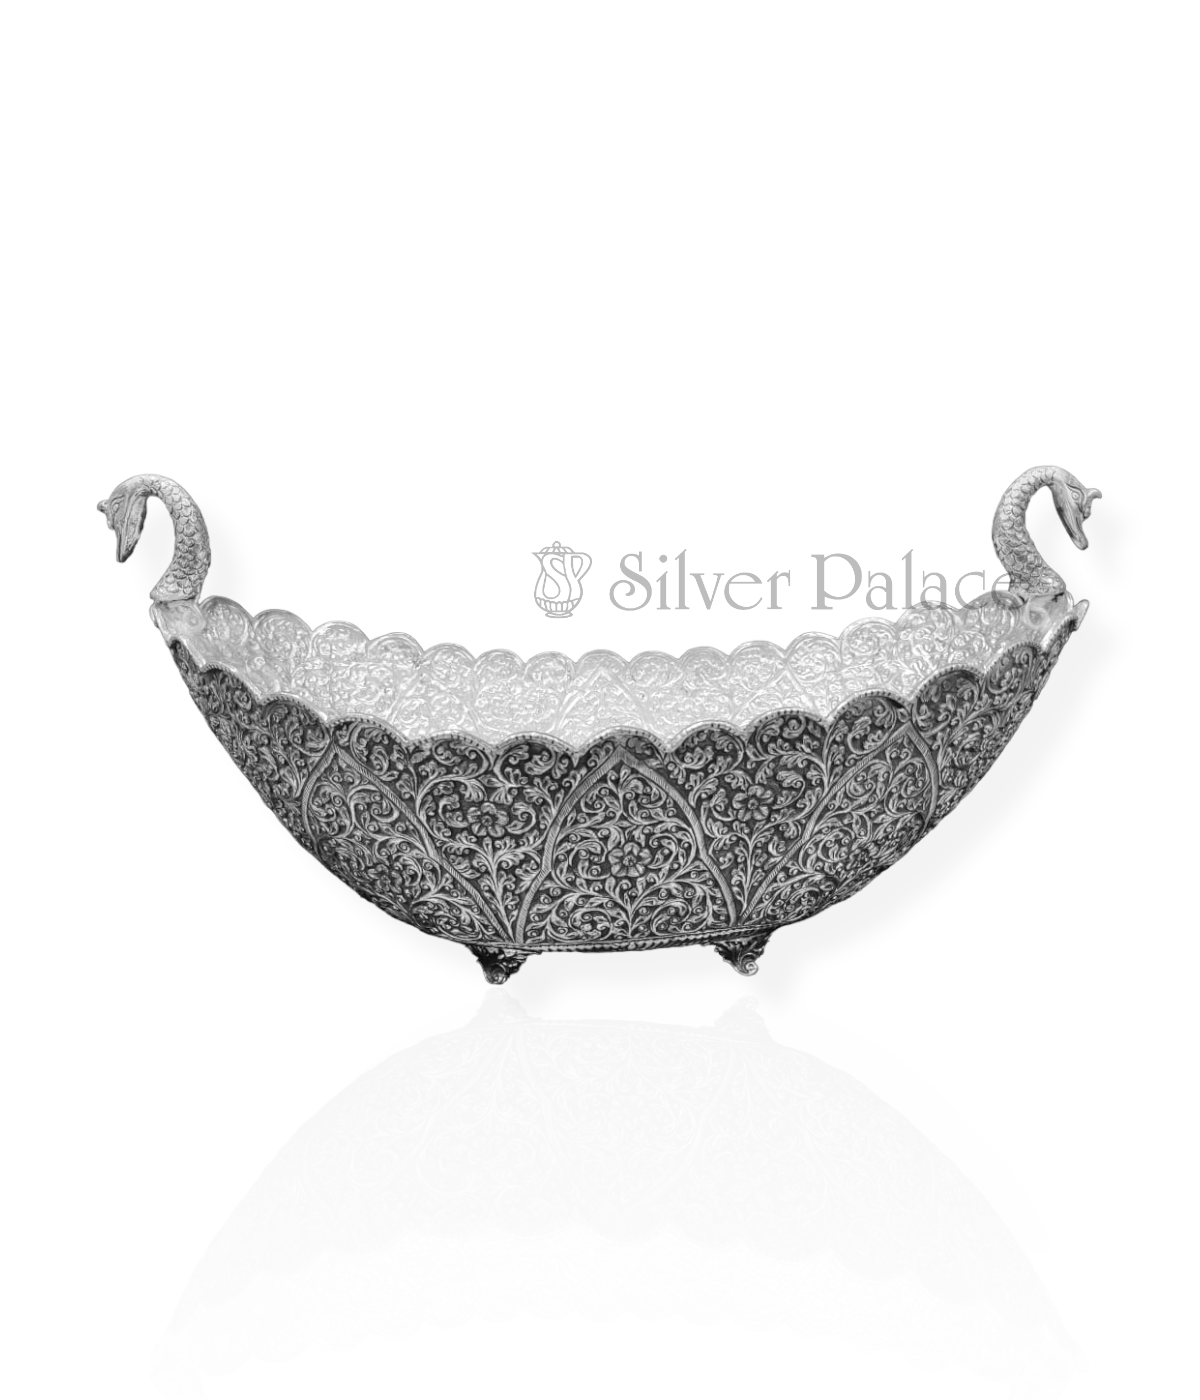 OXIDISED SILVER PEACOCK DESIGN INTRICATED FLOWER BOWL